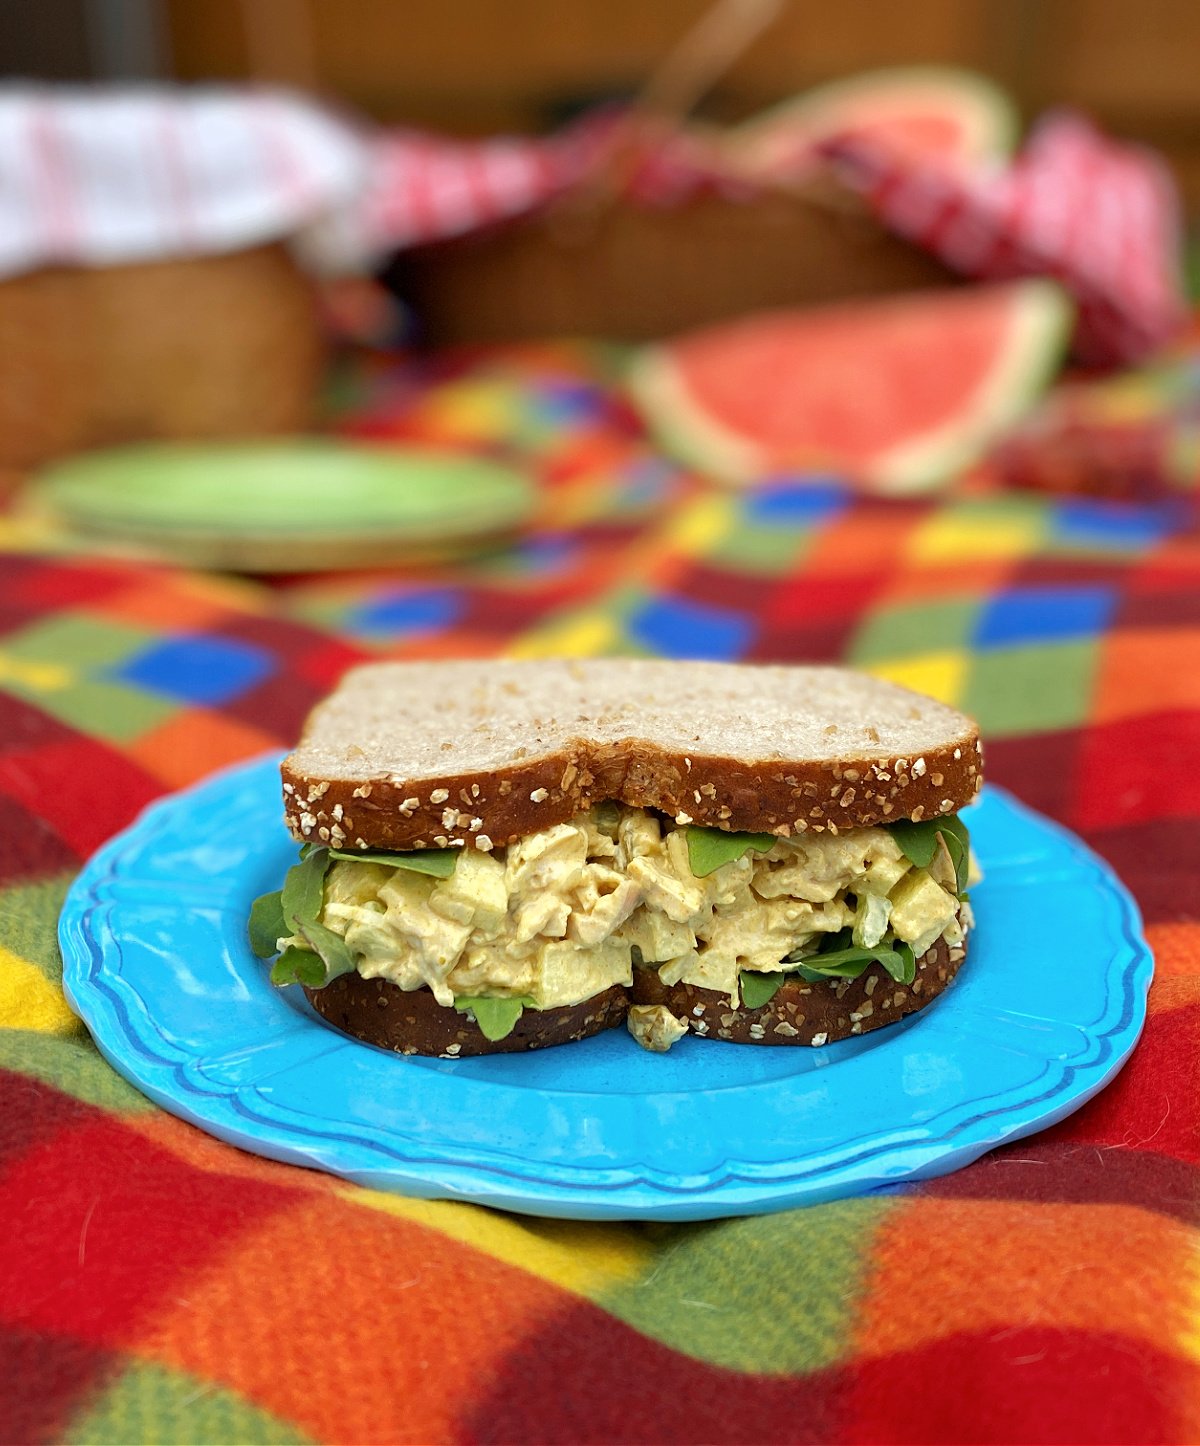 Curried chicken salad sandwich on a plate. Picnic blanket and picnic in the background.